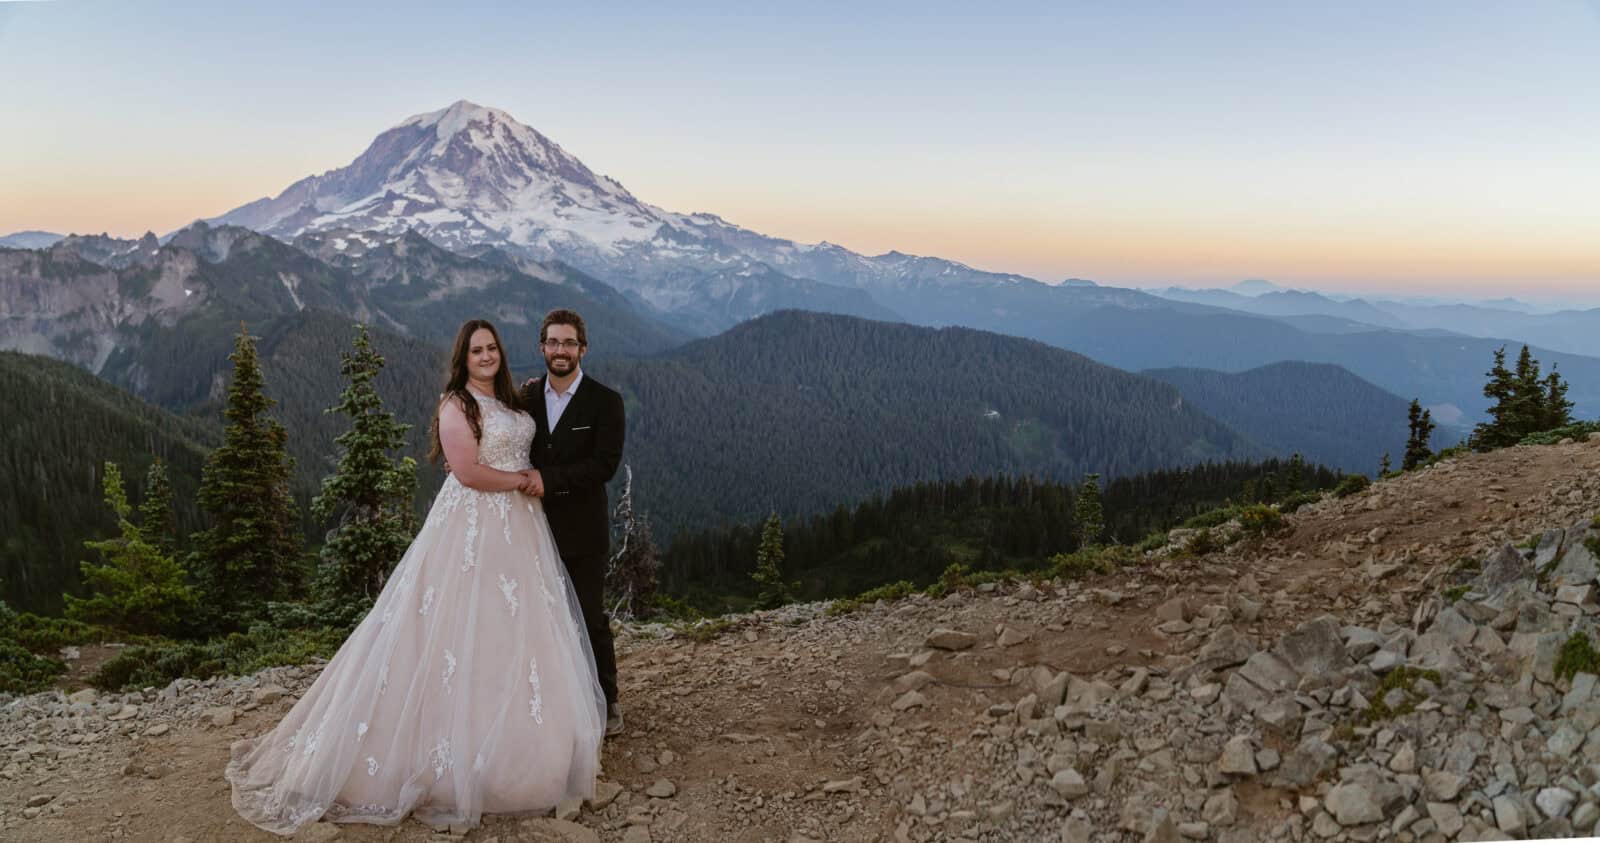 Couple enjoys sunset at Mount Rainier National Park on their elopement day